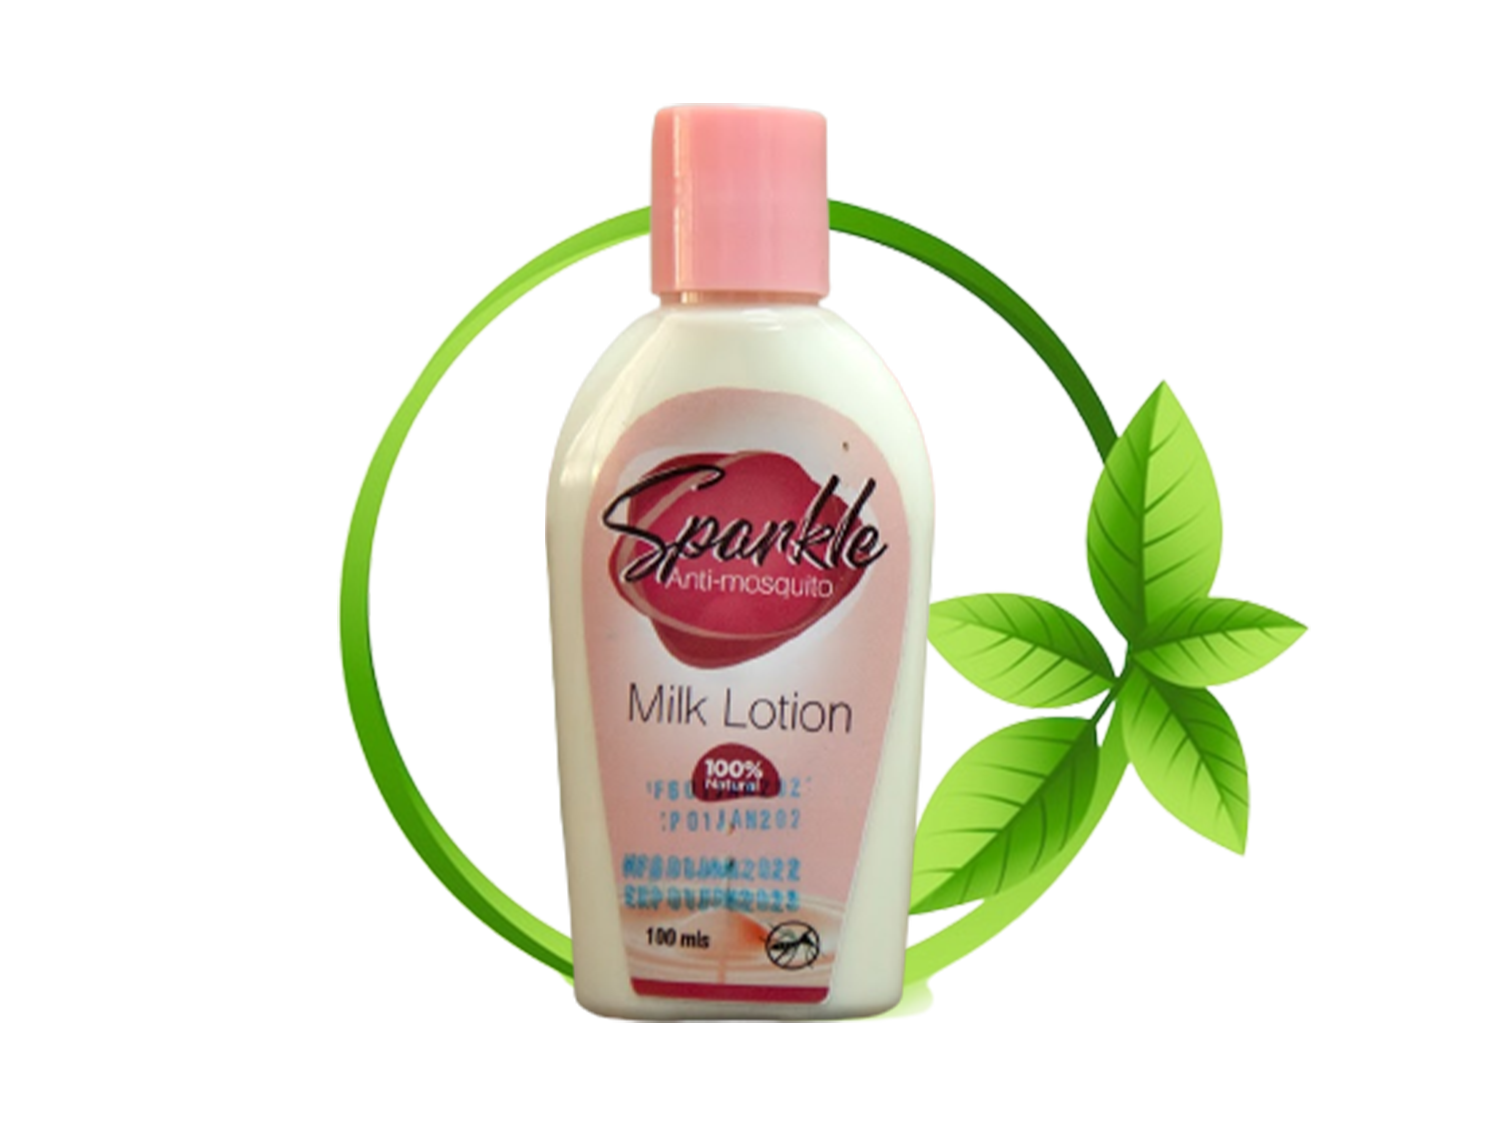 Sparkle body applied mosquito repellent